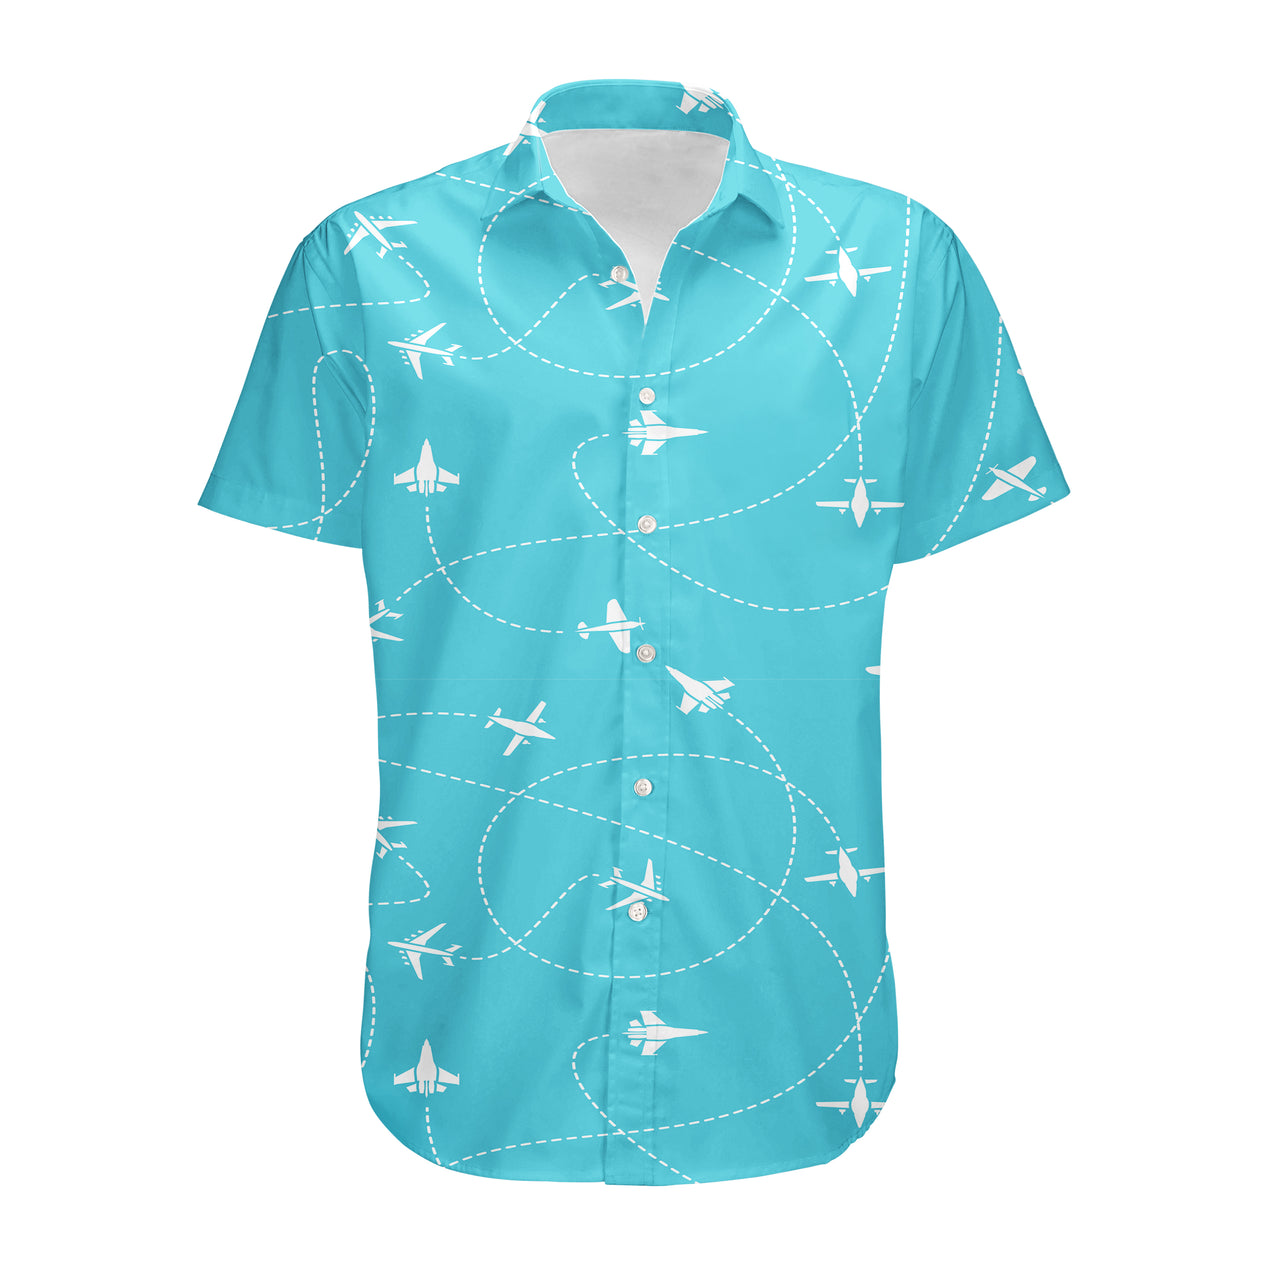 Travel The The World By Plane Designed 3D Shirts